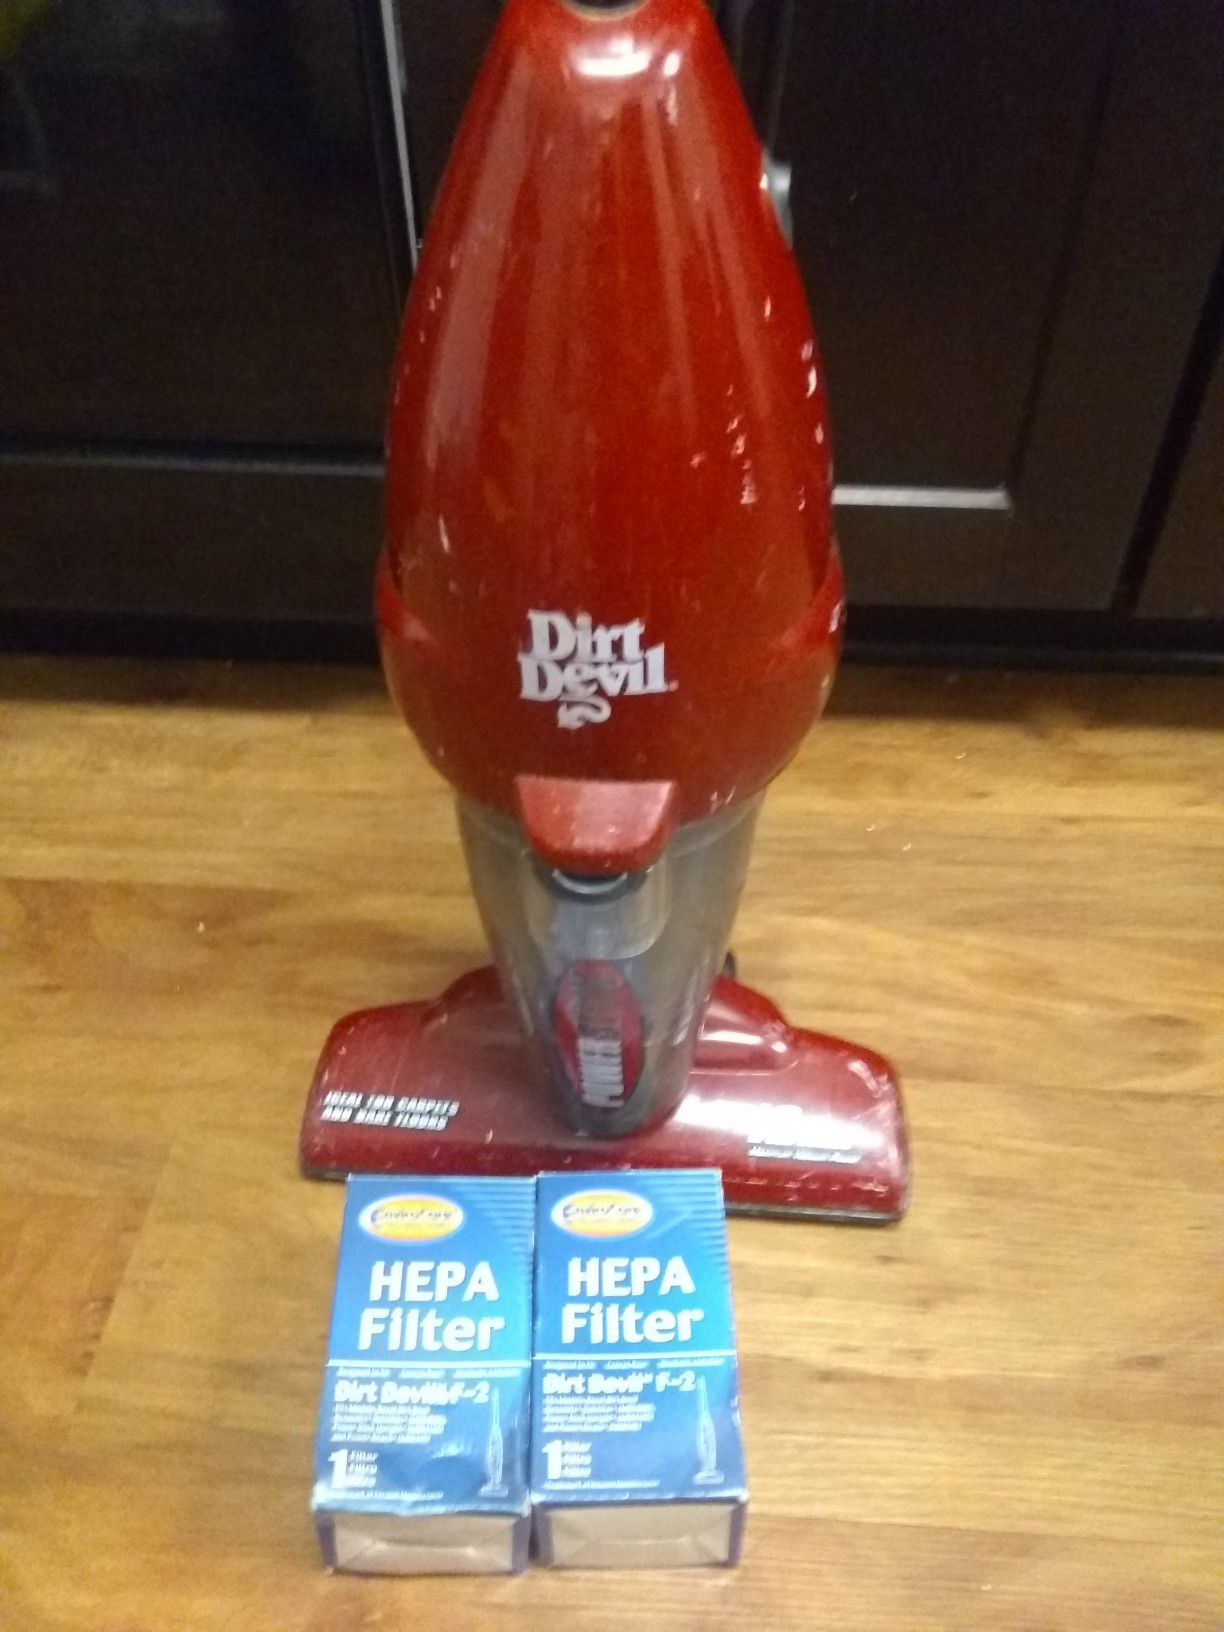 Dirt devil with new HEPA filters